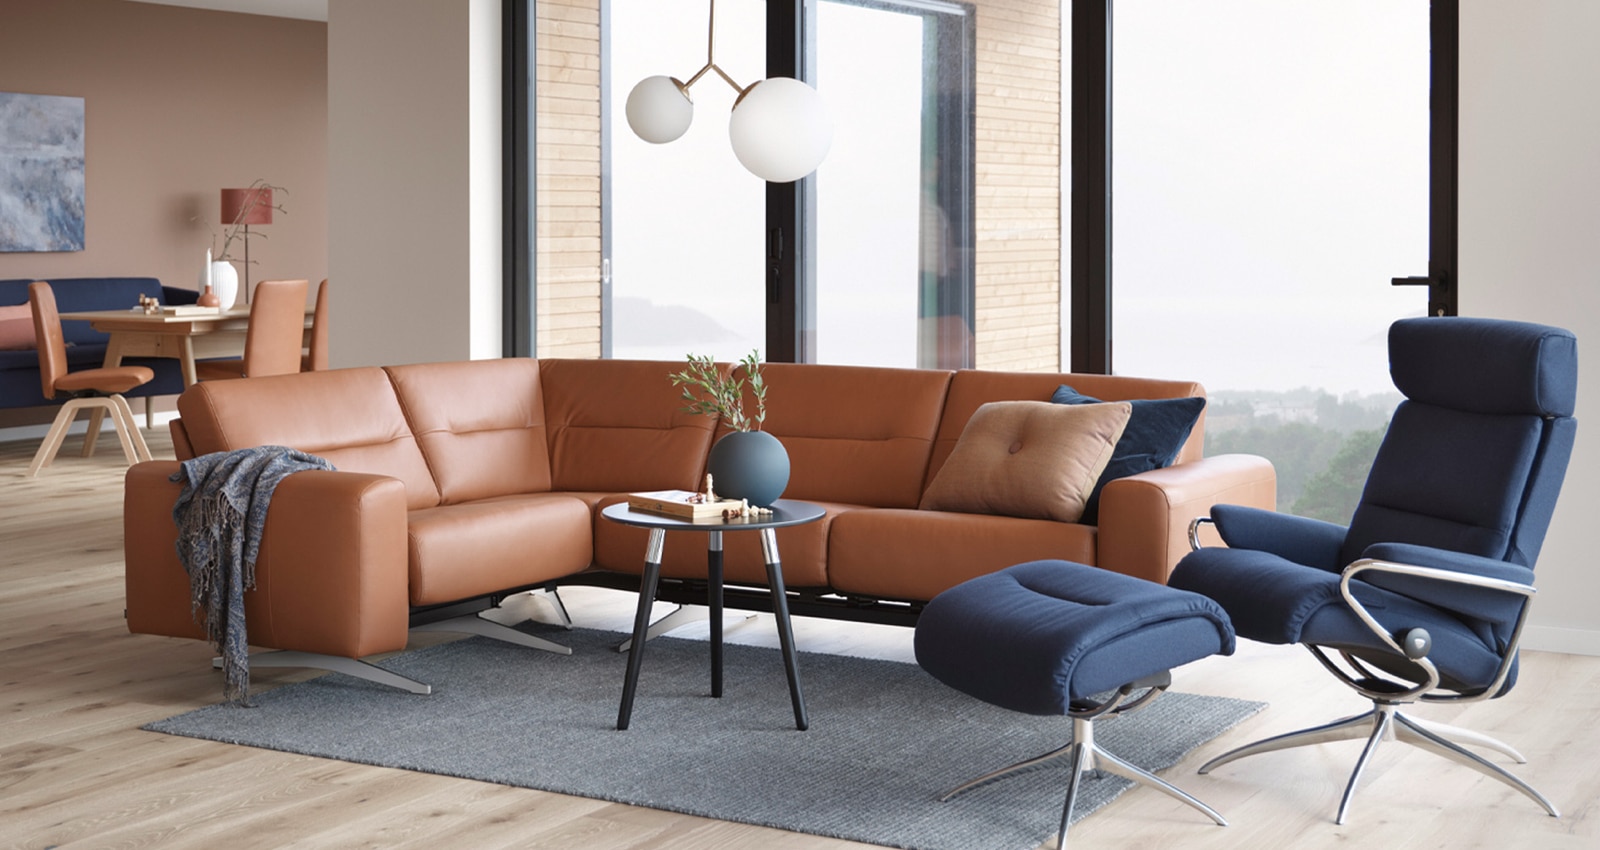 Home Furnishings, modern leather sofa and accent chair